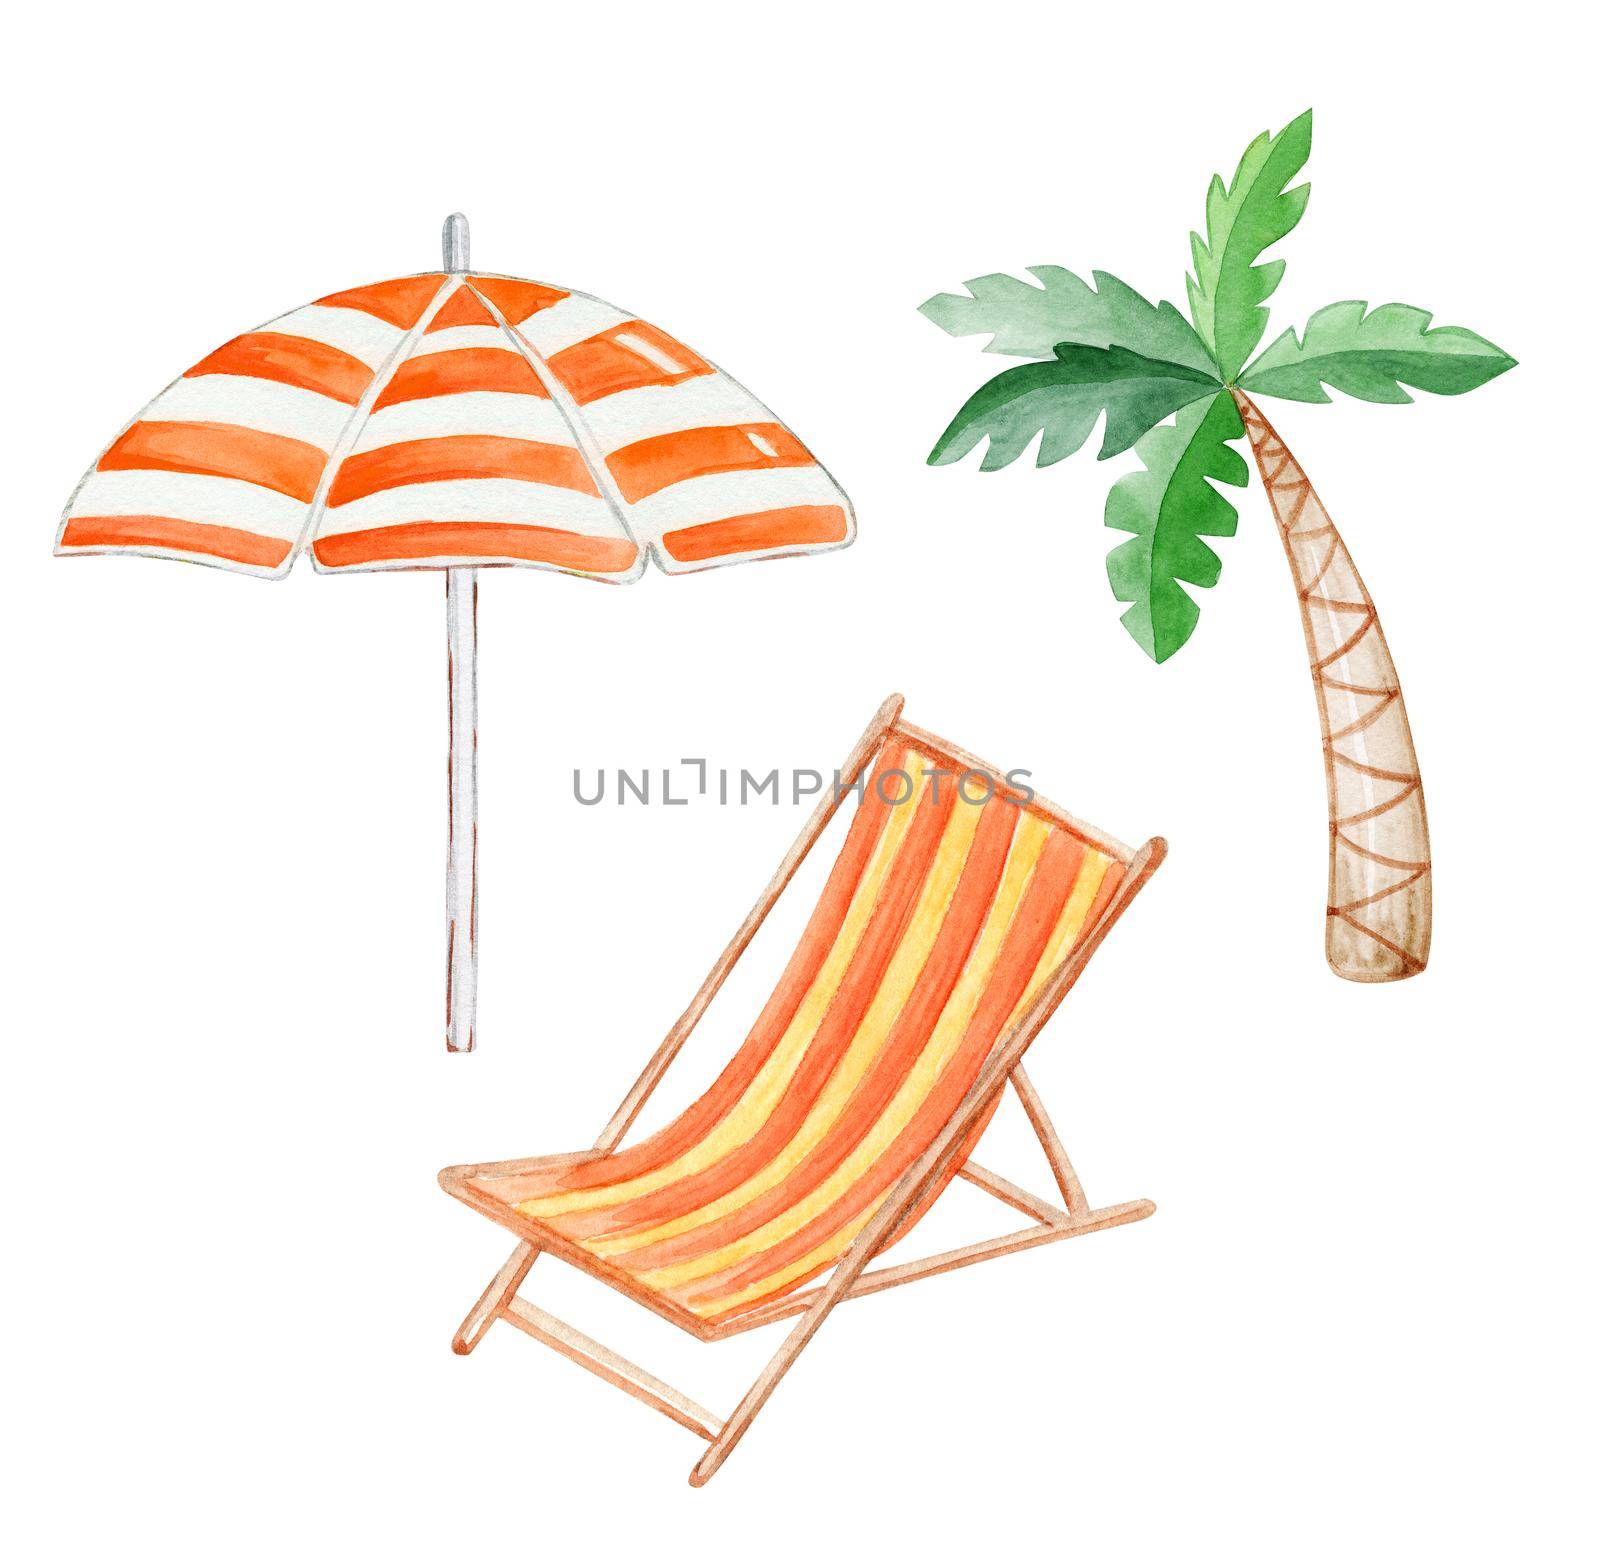 Watercolor deckchair, parasol and palm set isolated on white background. Summer beach Tourism hand drawn illustrations